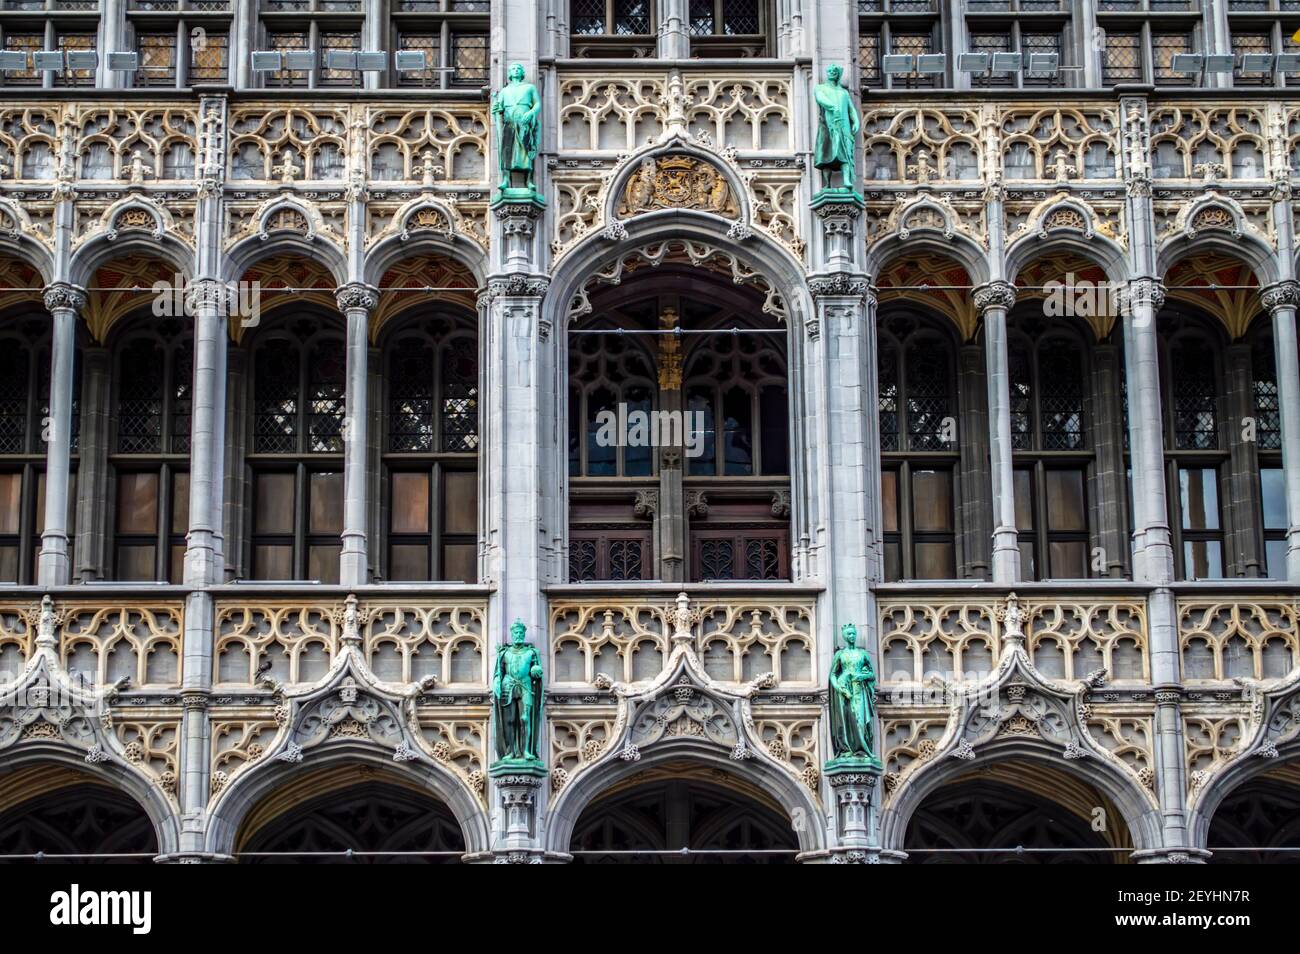 Brussels, Belgium - July 13, 2019: Gothic architecture details of buildings on the Grand Place square of Brussels, Belgium Stock Photo